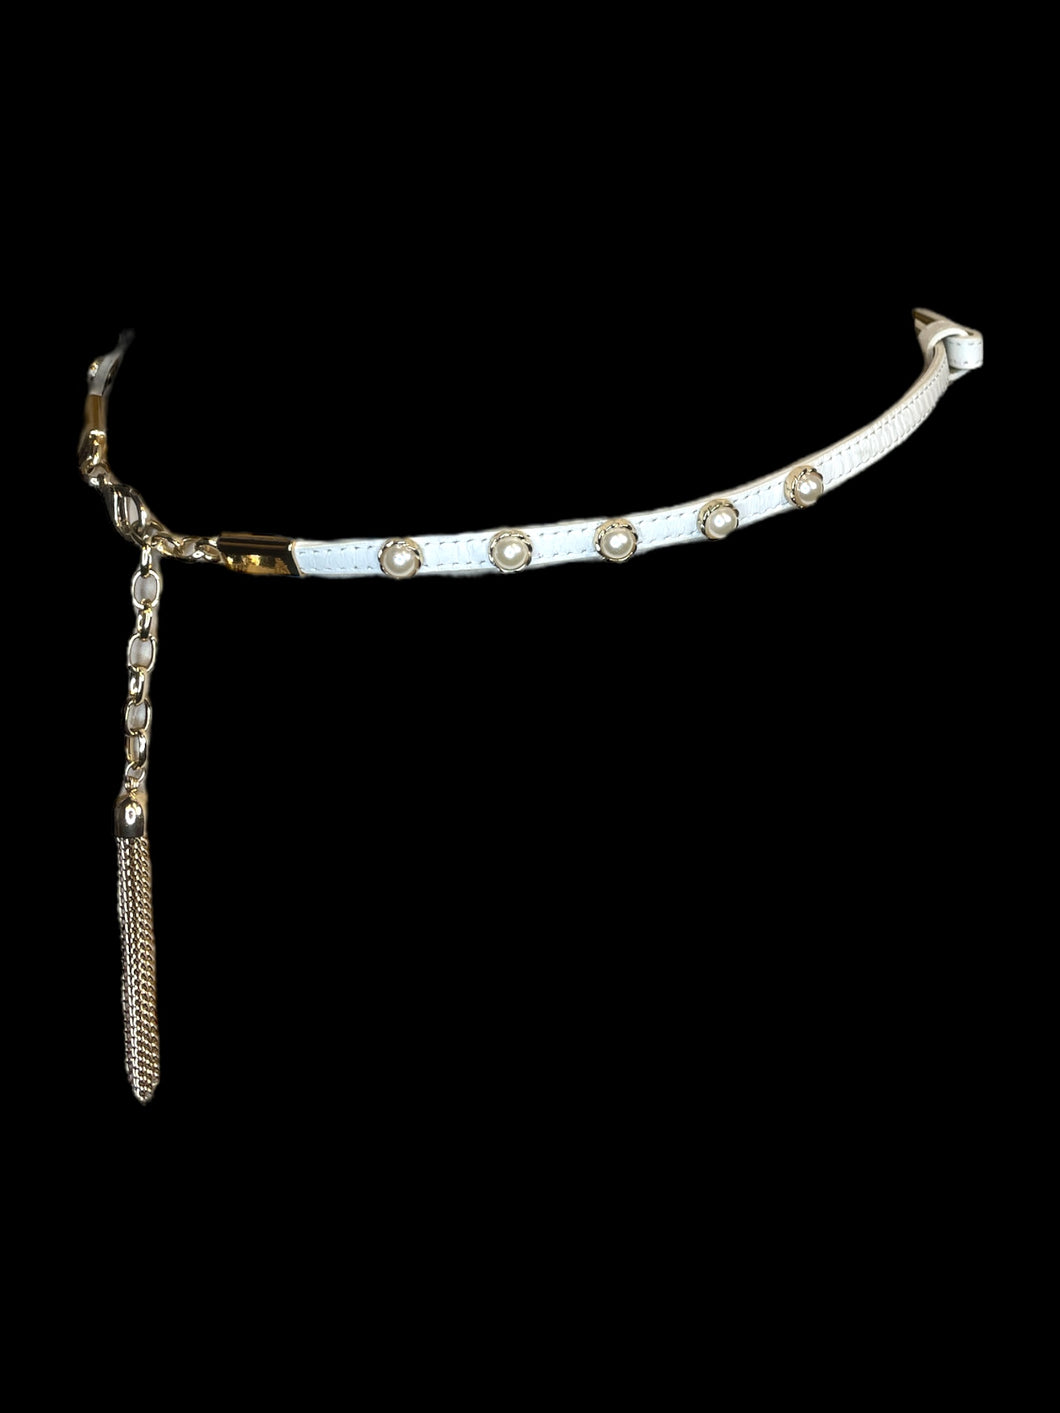 M White faux leather thin waist belt w/ gold like hardware, faux pearl details, adjustable lobster claw clasp & chain, adjustable peg & hole detail, & gold-like chain tassle